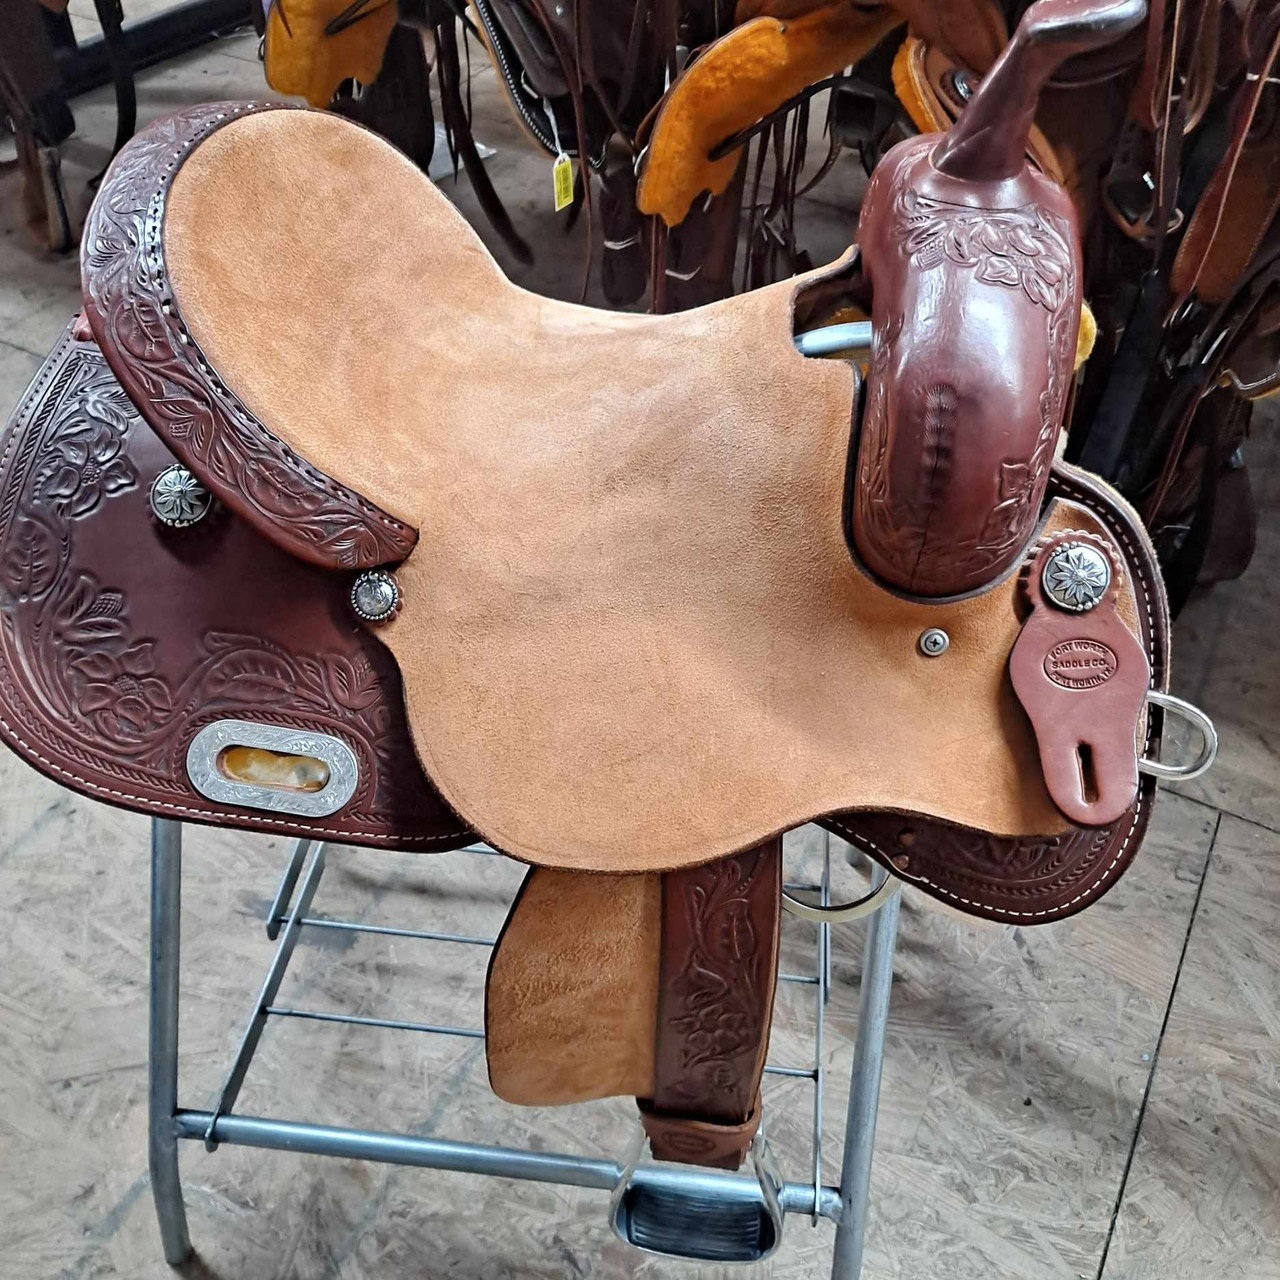 New Ft Worth Competitor Barrel Saddle by Fort Worth Saddle Co with 14 inch seat  S739(SBA140NF049A)